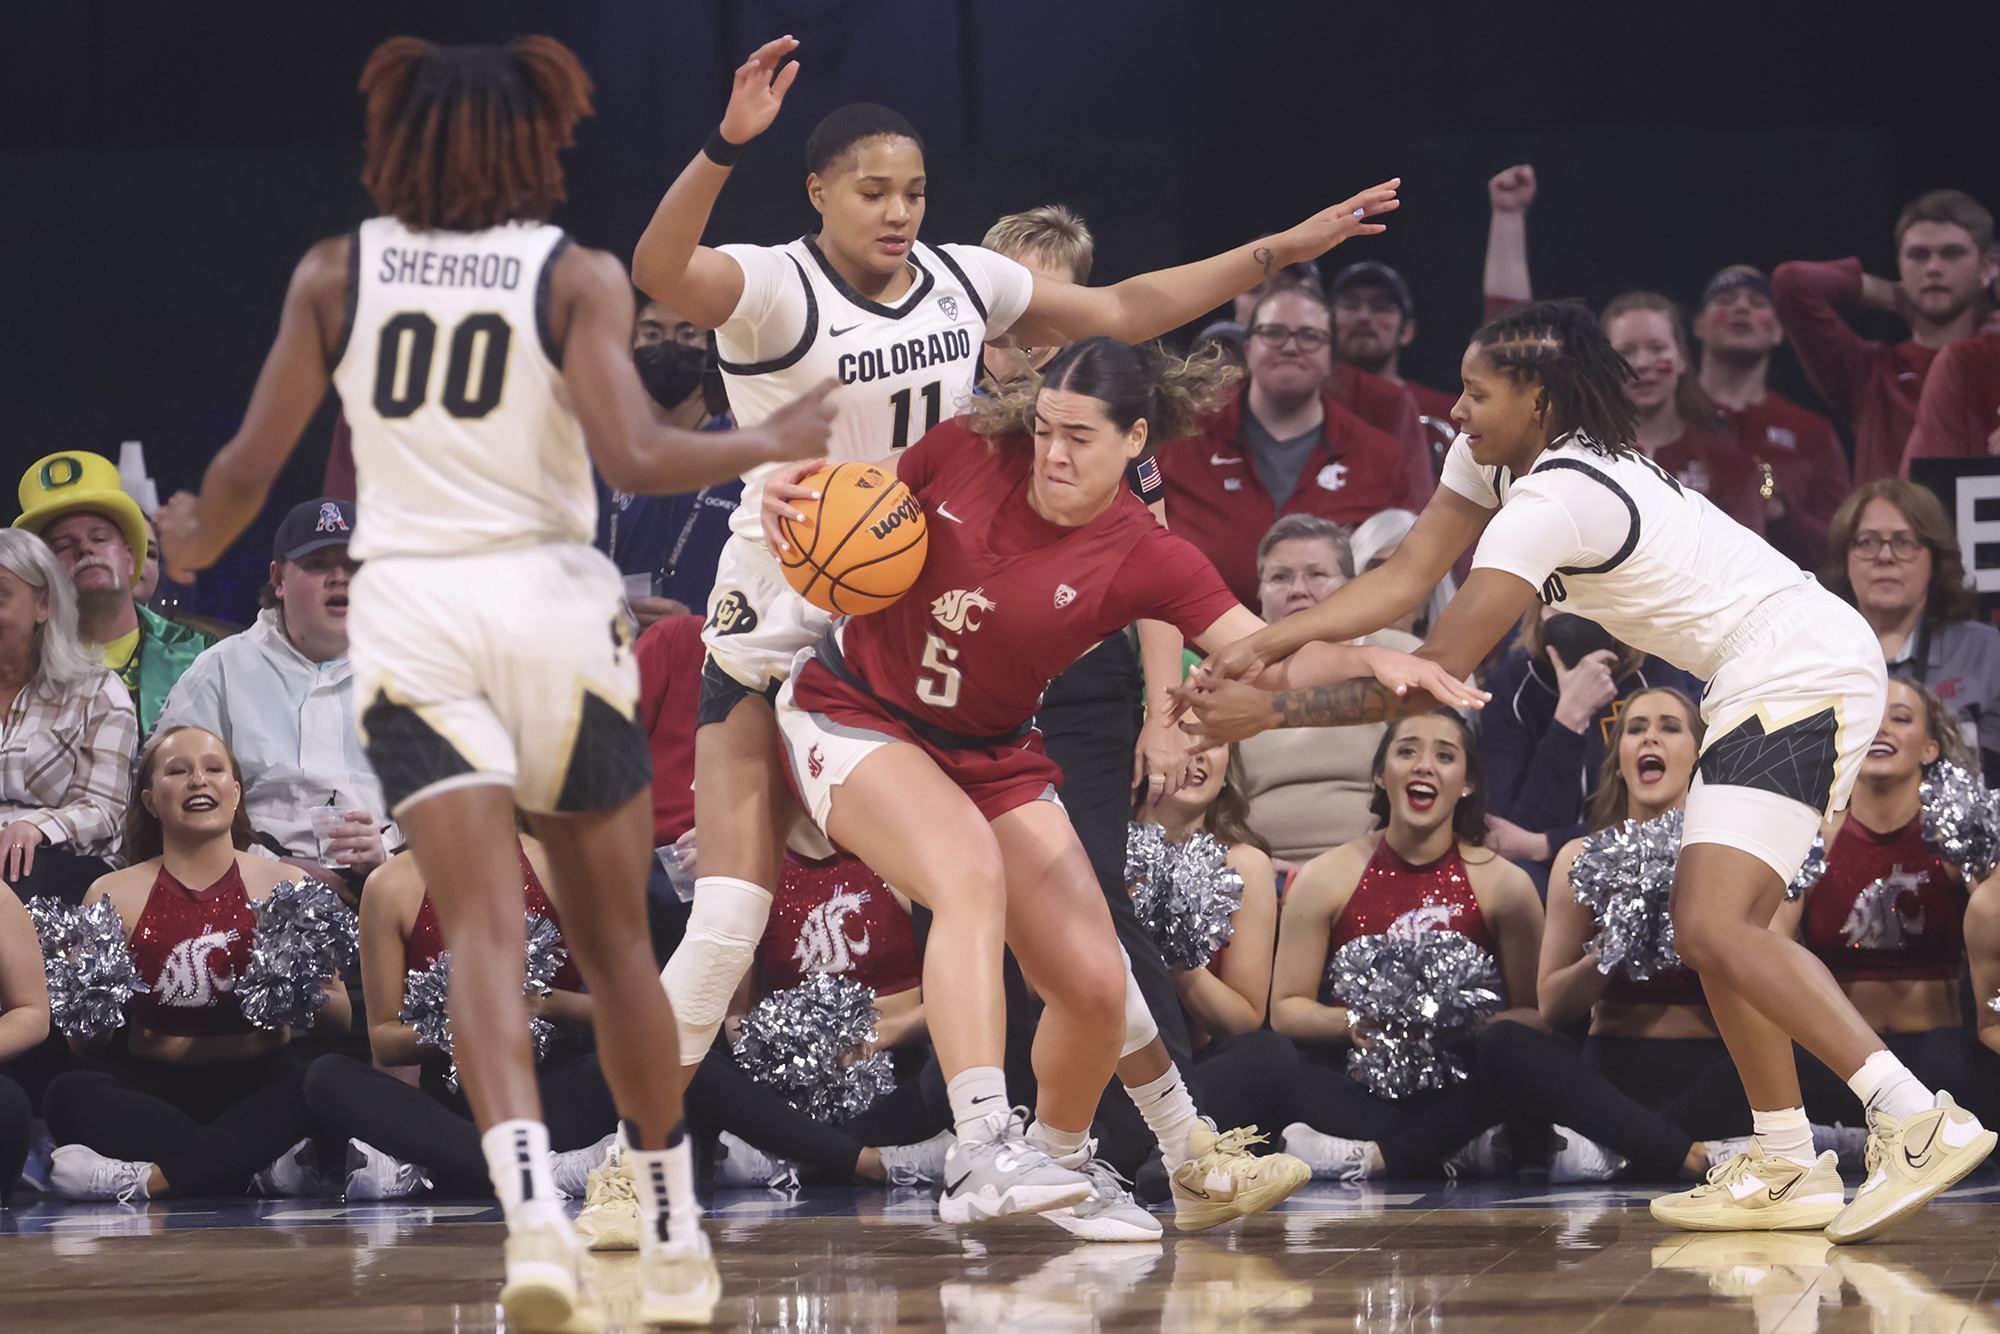 Washington State guard Charlisse Leger-Walker (5) is defended by Colorado center Quay Miller (11) and guard Tameiya Sadler, right, during the first half of an NCAA college basketball game in the semifinals of the Pac-12 women's tournament Friday, March 3, 2023, in Las Vegas.